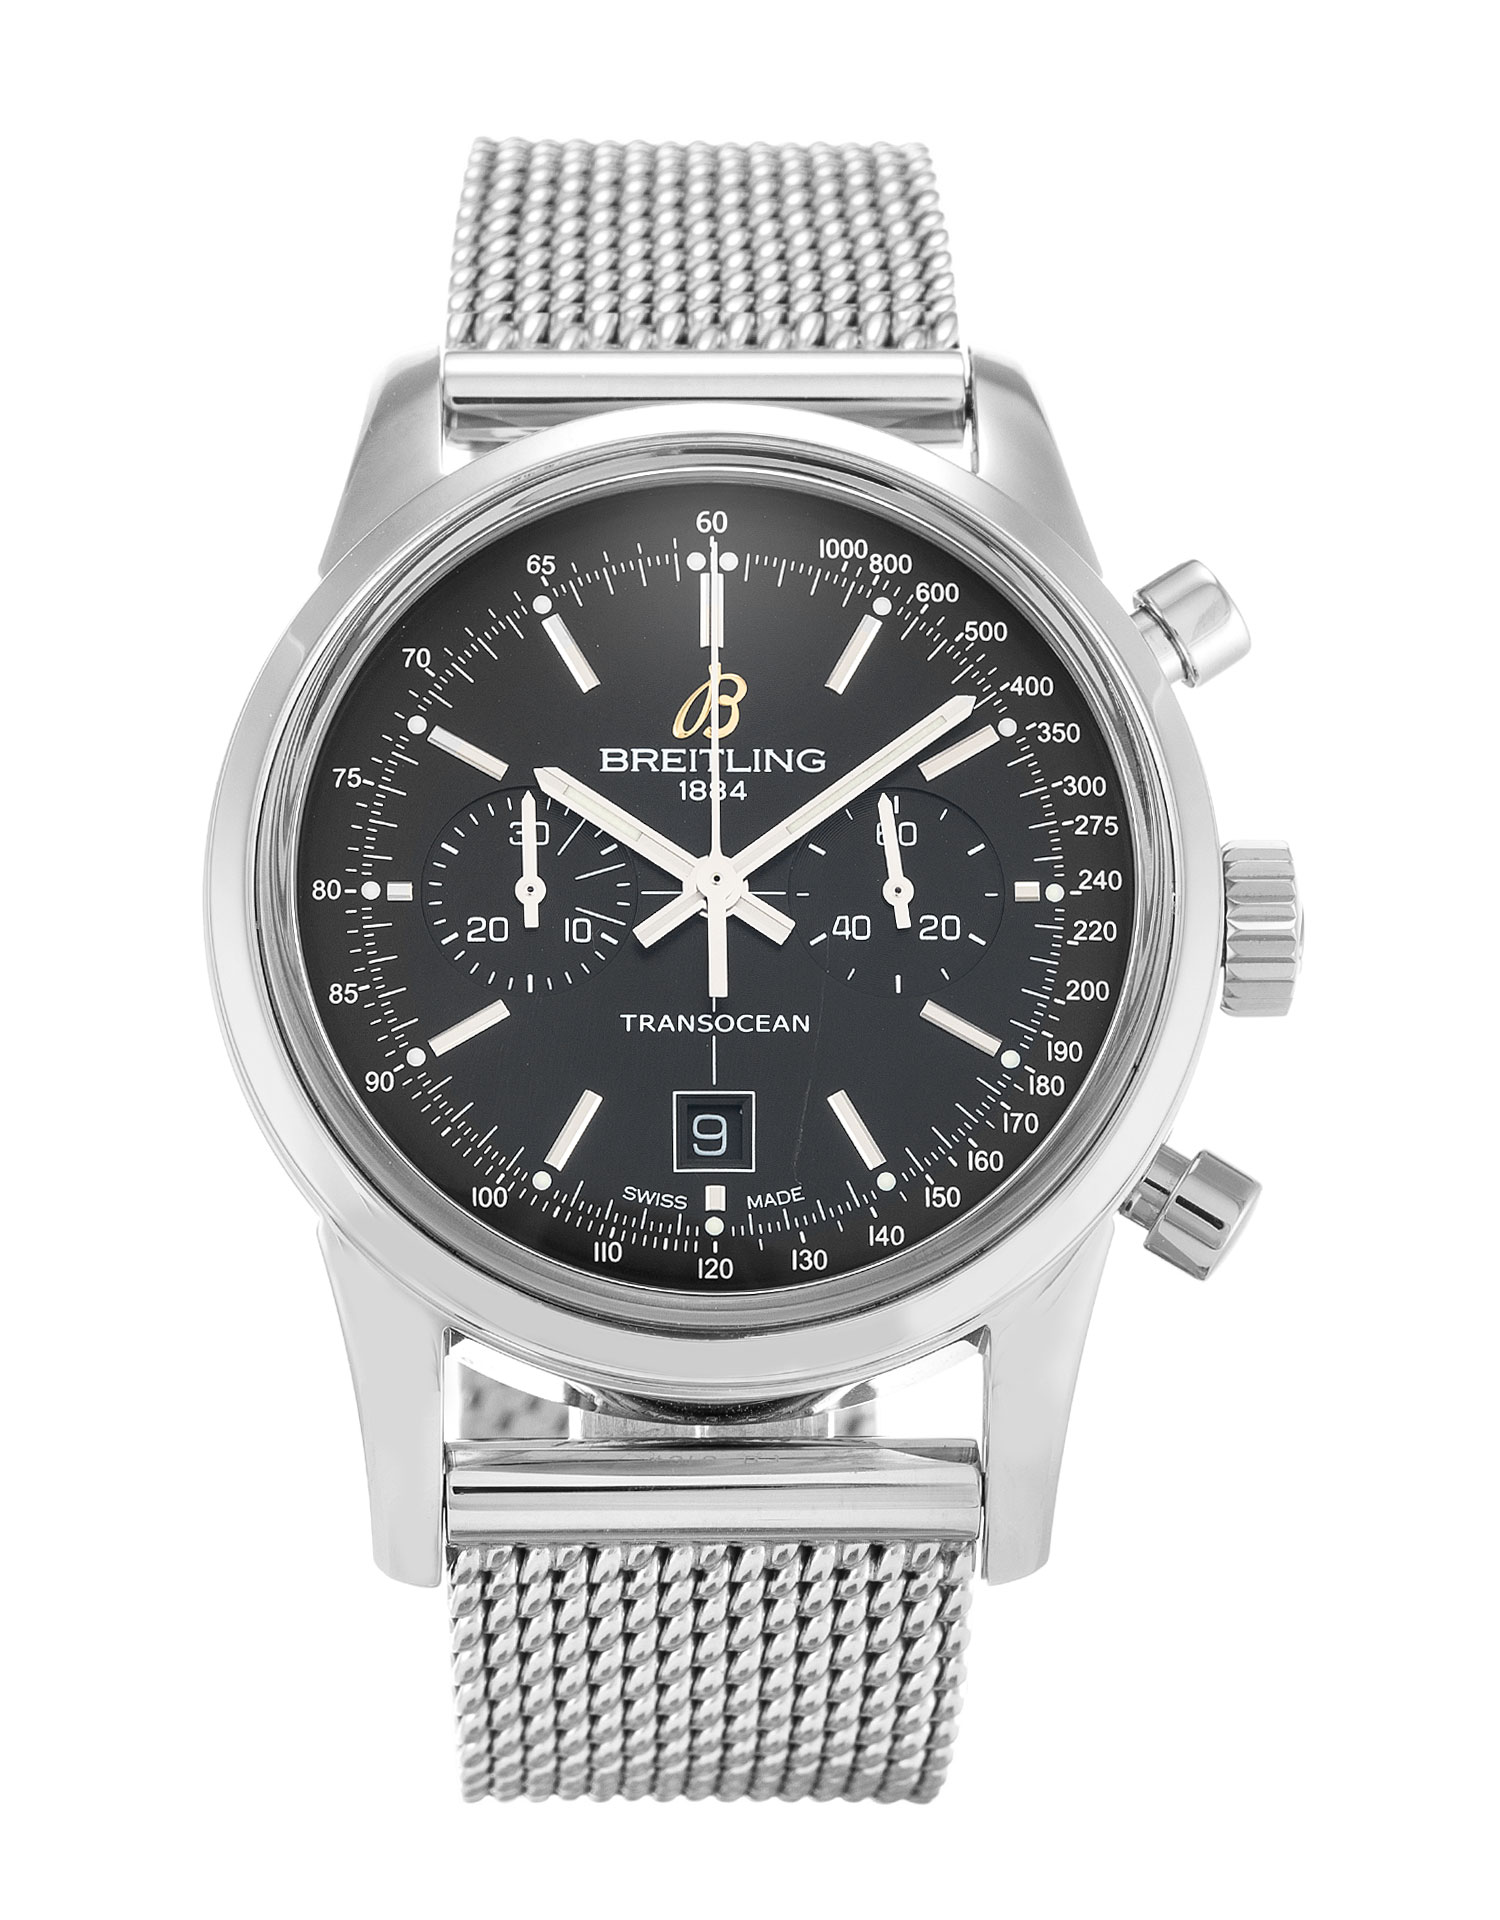 Breitling Transocean 38 Chronograph Reference A41310 - W2W/1-10